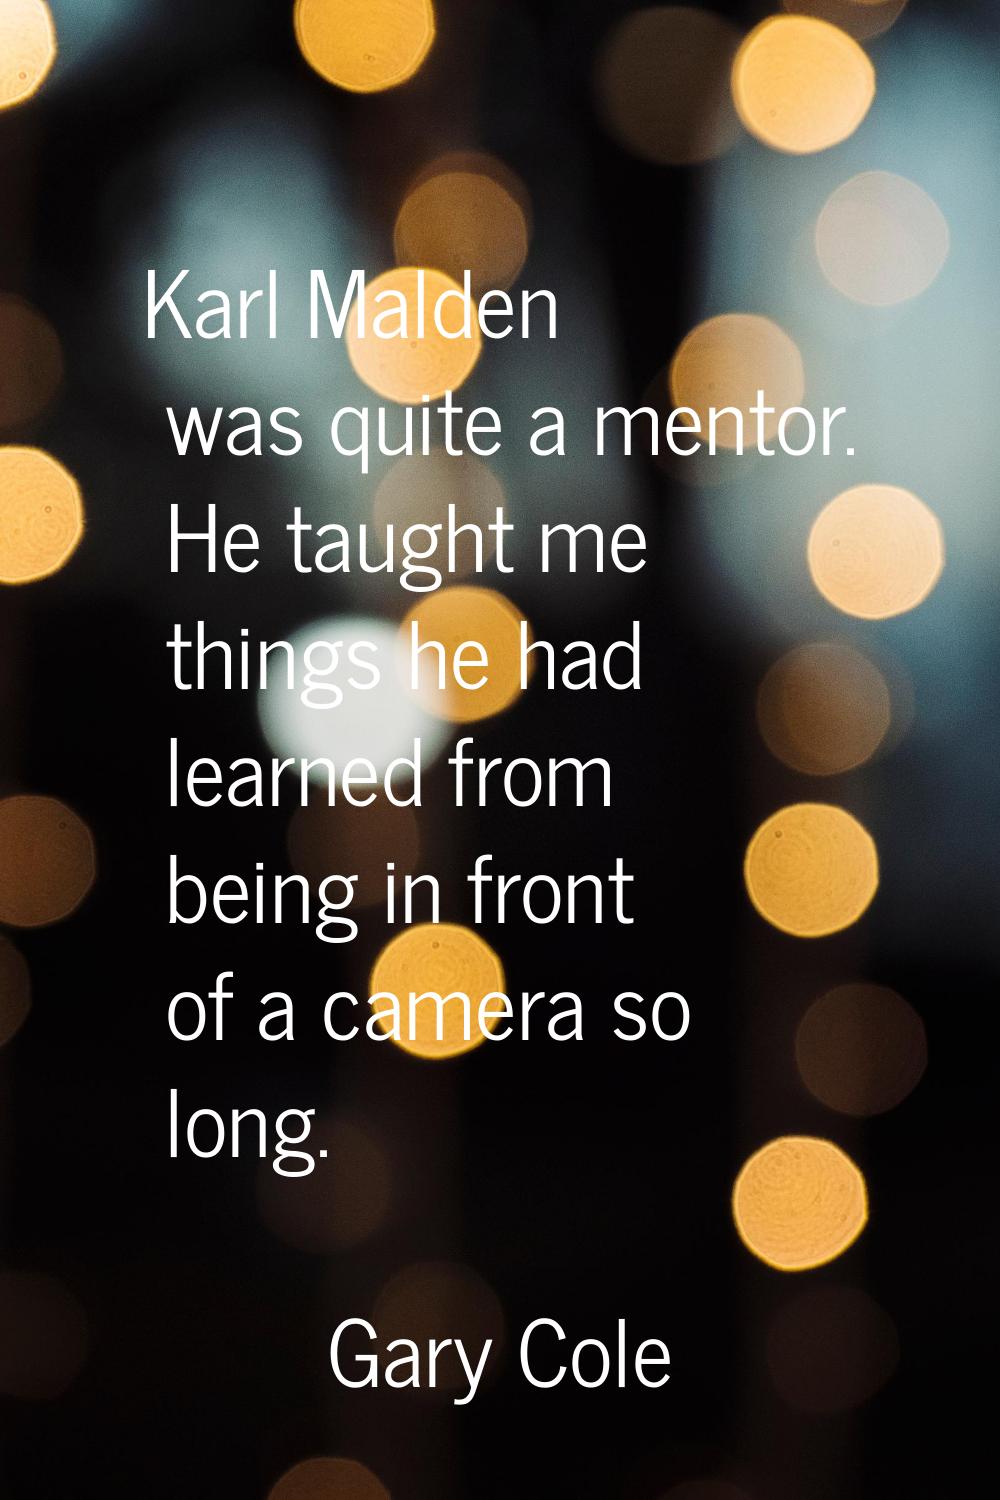 Karl Malden was quite a mentor. He taught me things he had learned from being in front of a camera 